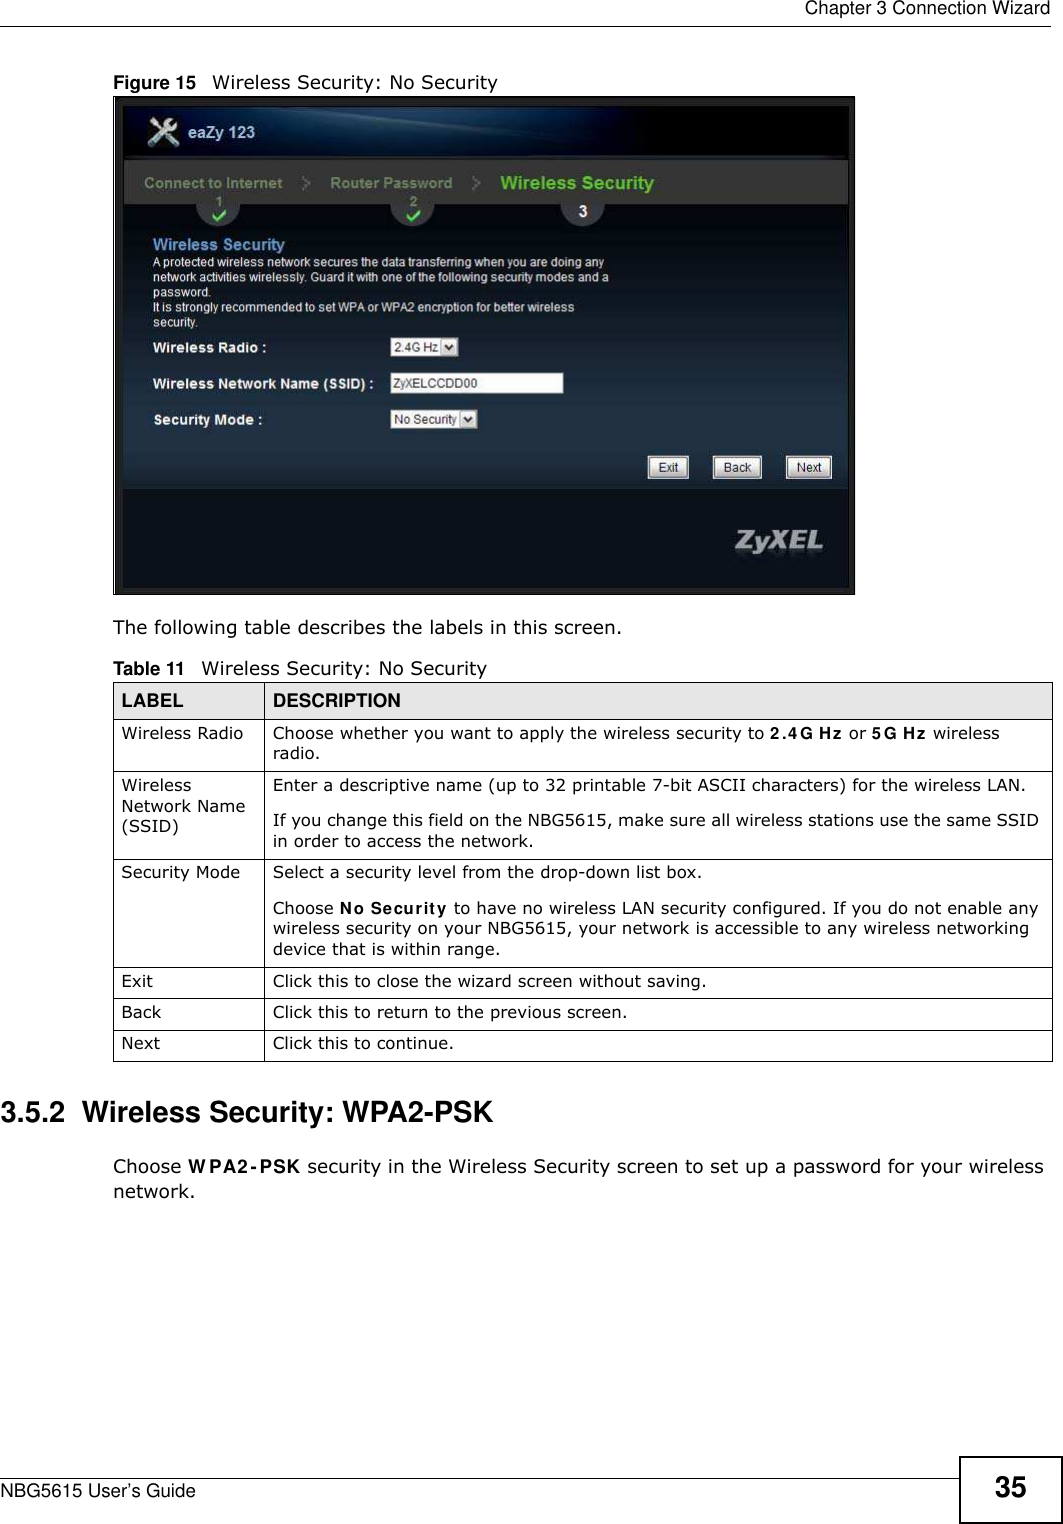  Chapter 3 Connection WizardNBG5615 User’s Guide 35Figure 15   Wireless Security: No Security The following table describes the labels in this screen.3.5.2  Wireless Security: WPA2-PSKChoose W PA2-PSK security in the Wireless Security screen to set up a password for your wireless network.Table 11   Wireless Security: No SecurityLABEL DESCRIPTIONWireless Radio Choose whether you want to apply the wireless security to 2.4 G Hz or 5 G Hz wireless radio.Wireless Network Name (SSID)Enter a descriptive name (up to 32 printable 7-bit ASCII characters) for the wireless LAN. If you change this field on the NBG5615, make sure all wireless stations use the same SSID in order to access the network. Security Mode Select a security level from the drop-down list box. Choose No Security to have no wireless LAN security configured. If you do not enable any wireless security on your NBG5615, your network is accessible to any wireless networking device that is within range. Exit Click this to close the wizard screen without saving.Back Click this to return to the previous screen.Next Click this to continue. 